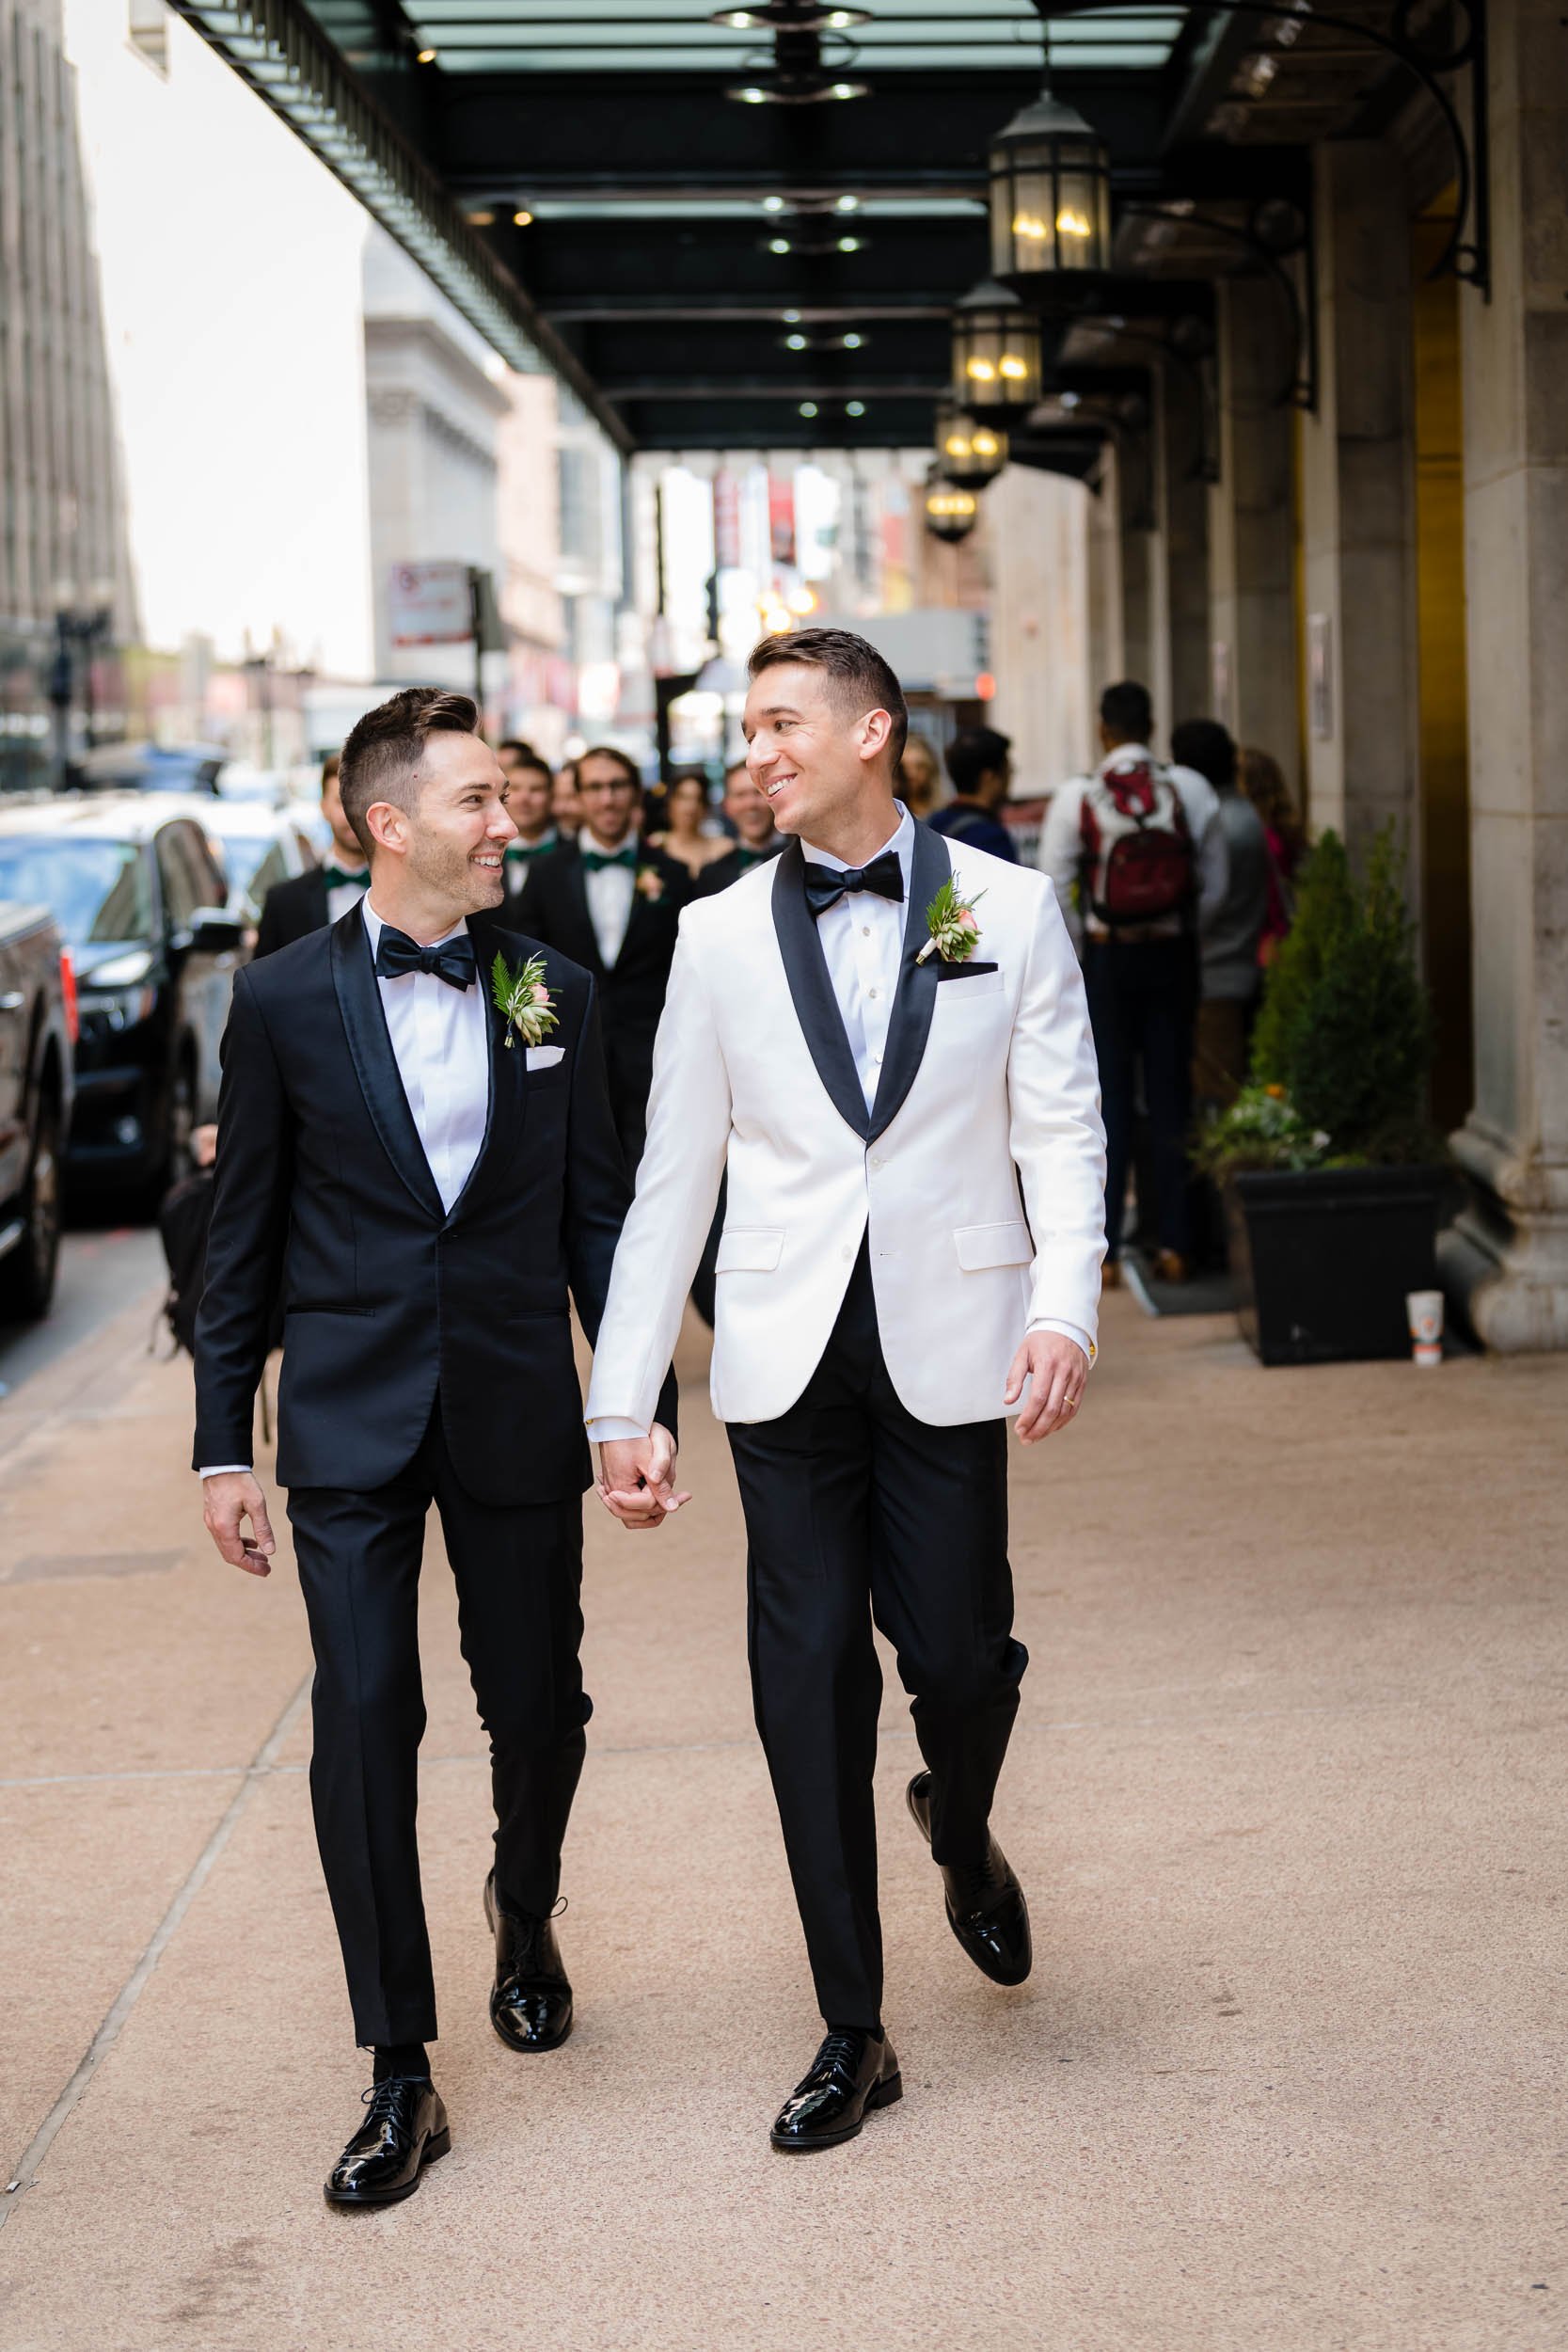 Downtown Chicago | Outdoor wedding party photo | Chicago IL